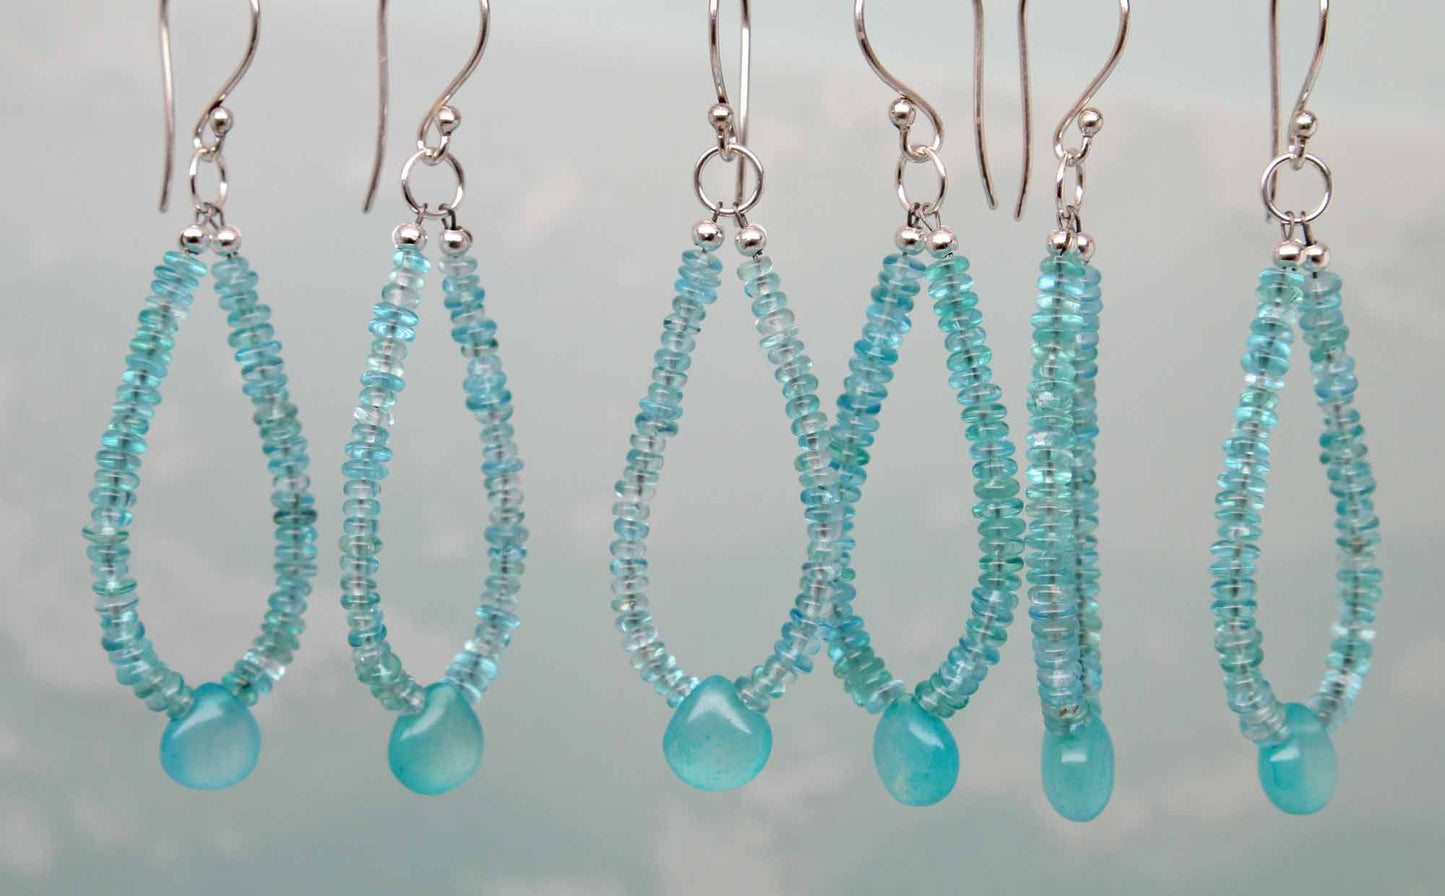 Load image into Gallery viewer, Apatite and Chalcedony Earrings in Sterling Silver
